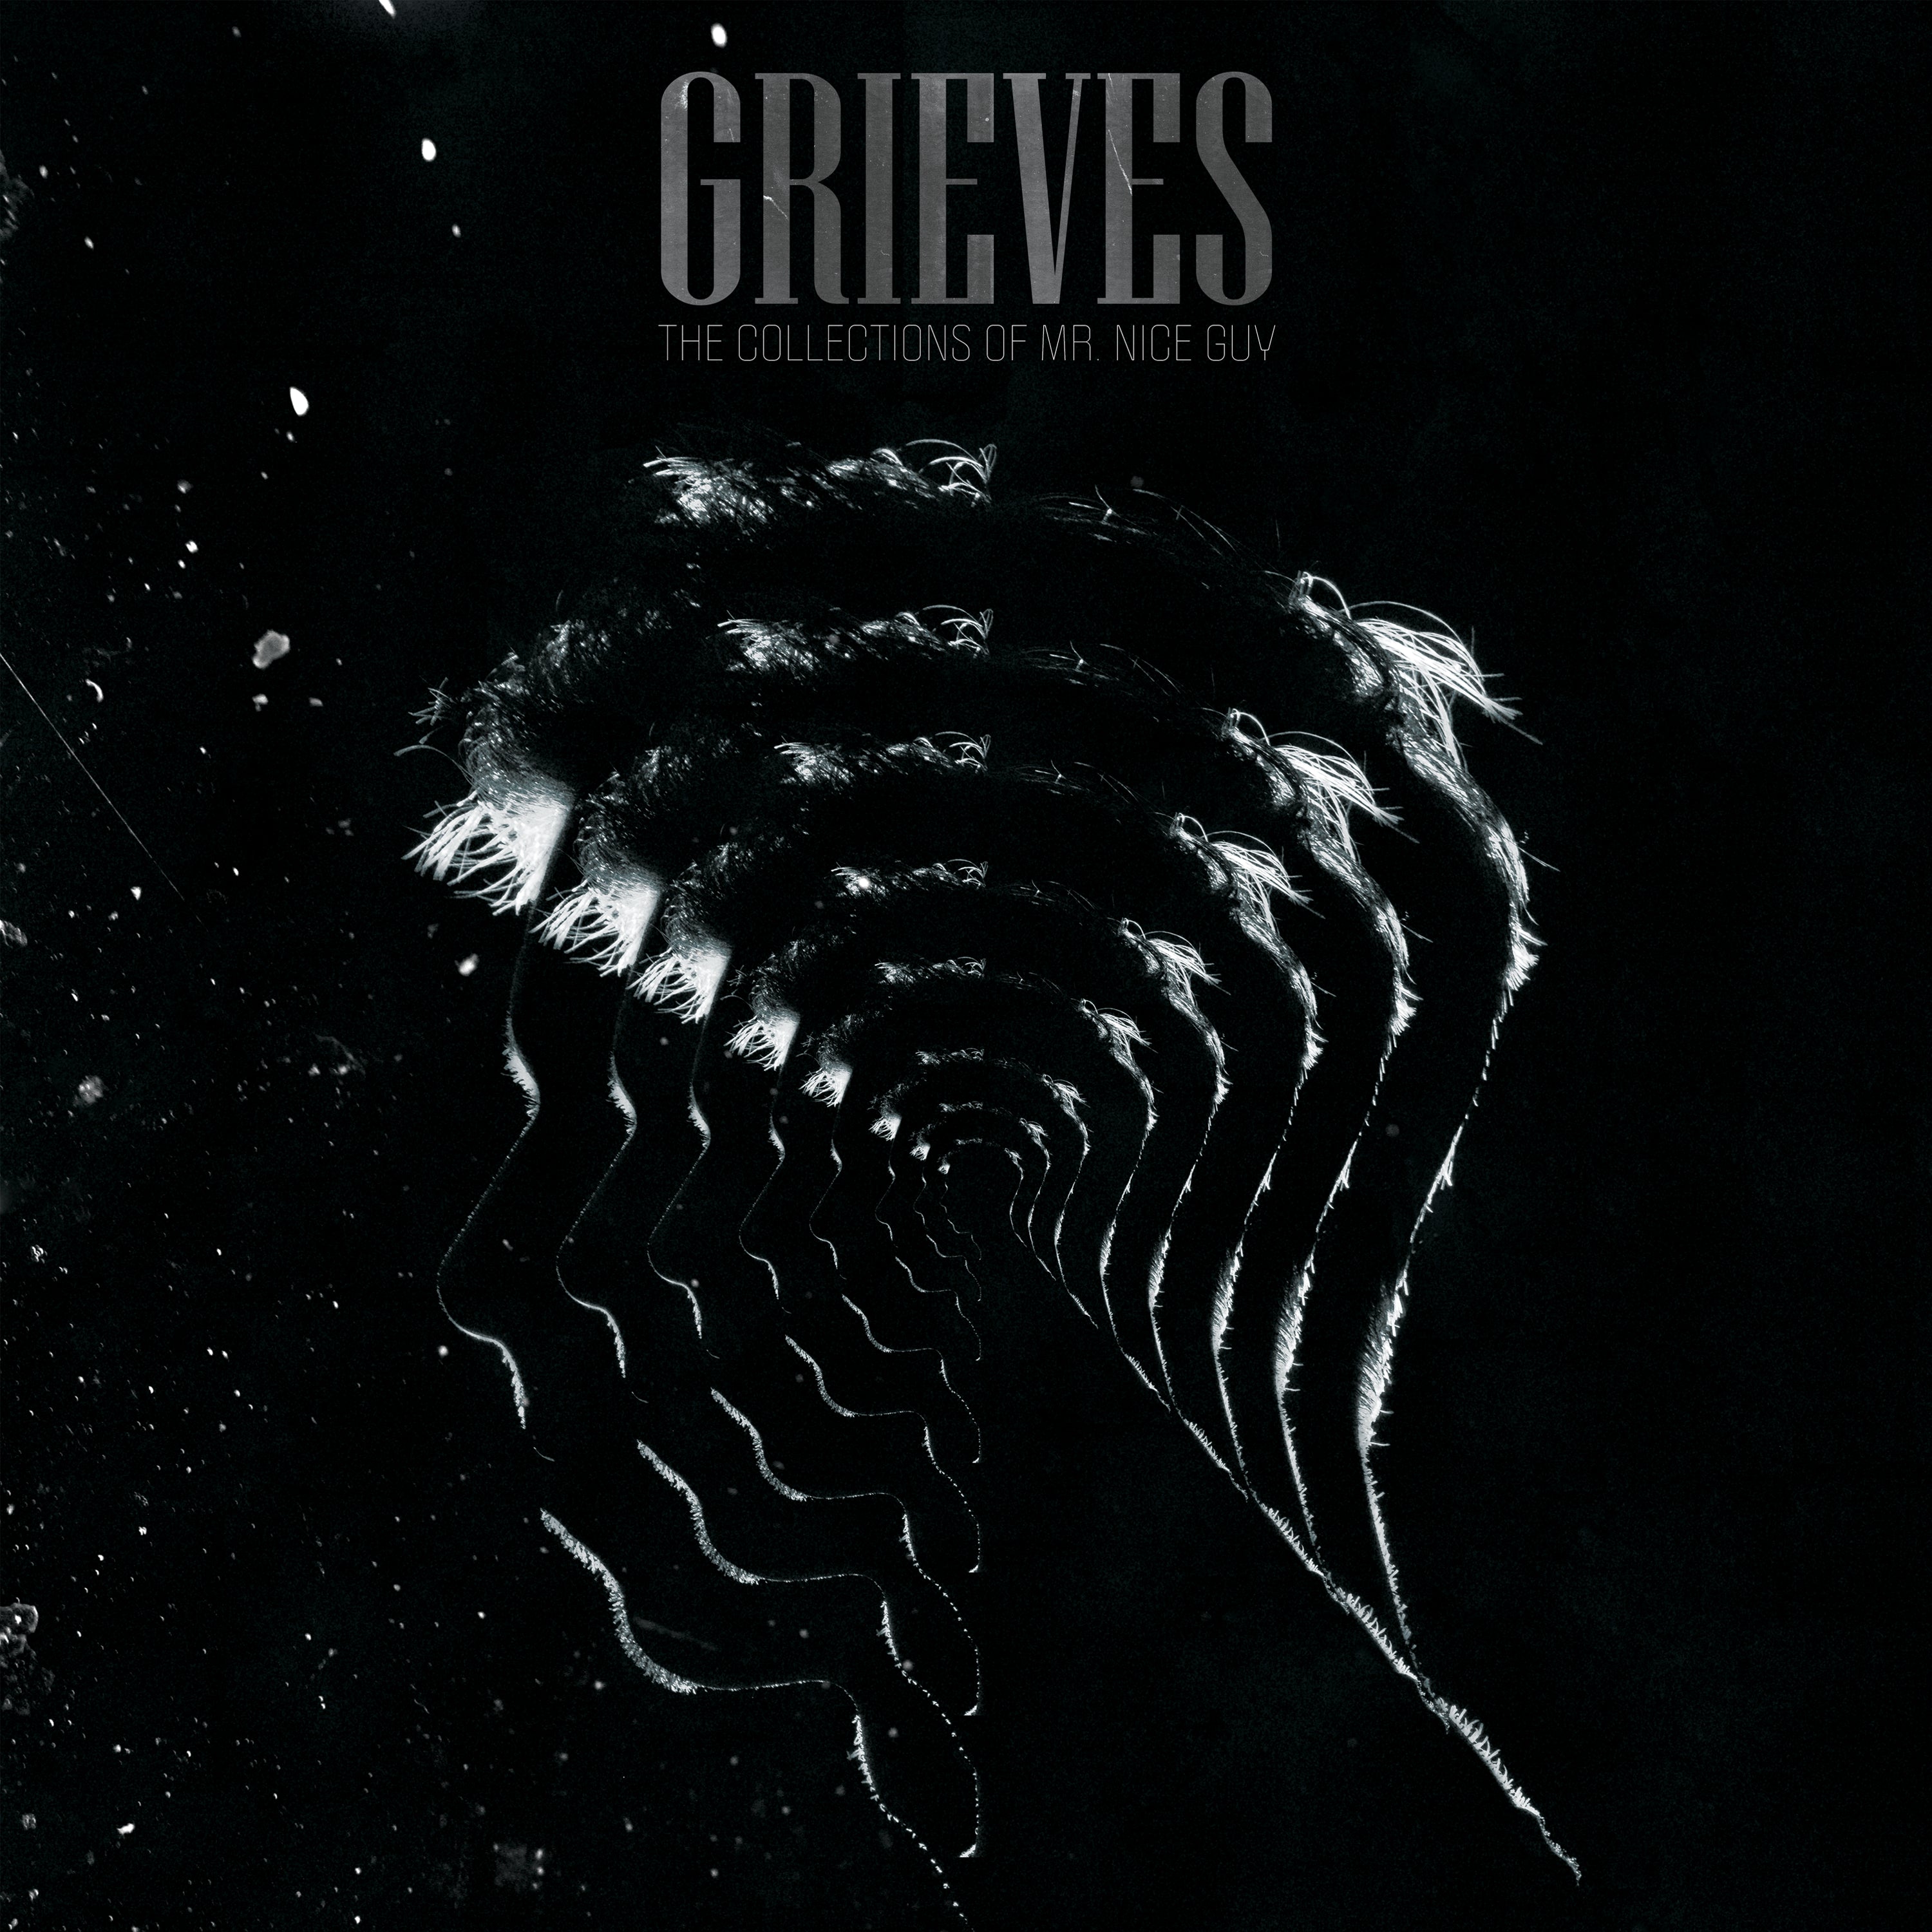 Grieves - The Collections of Mr. Nice Guy [Teal Vinyl]